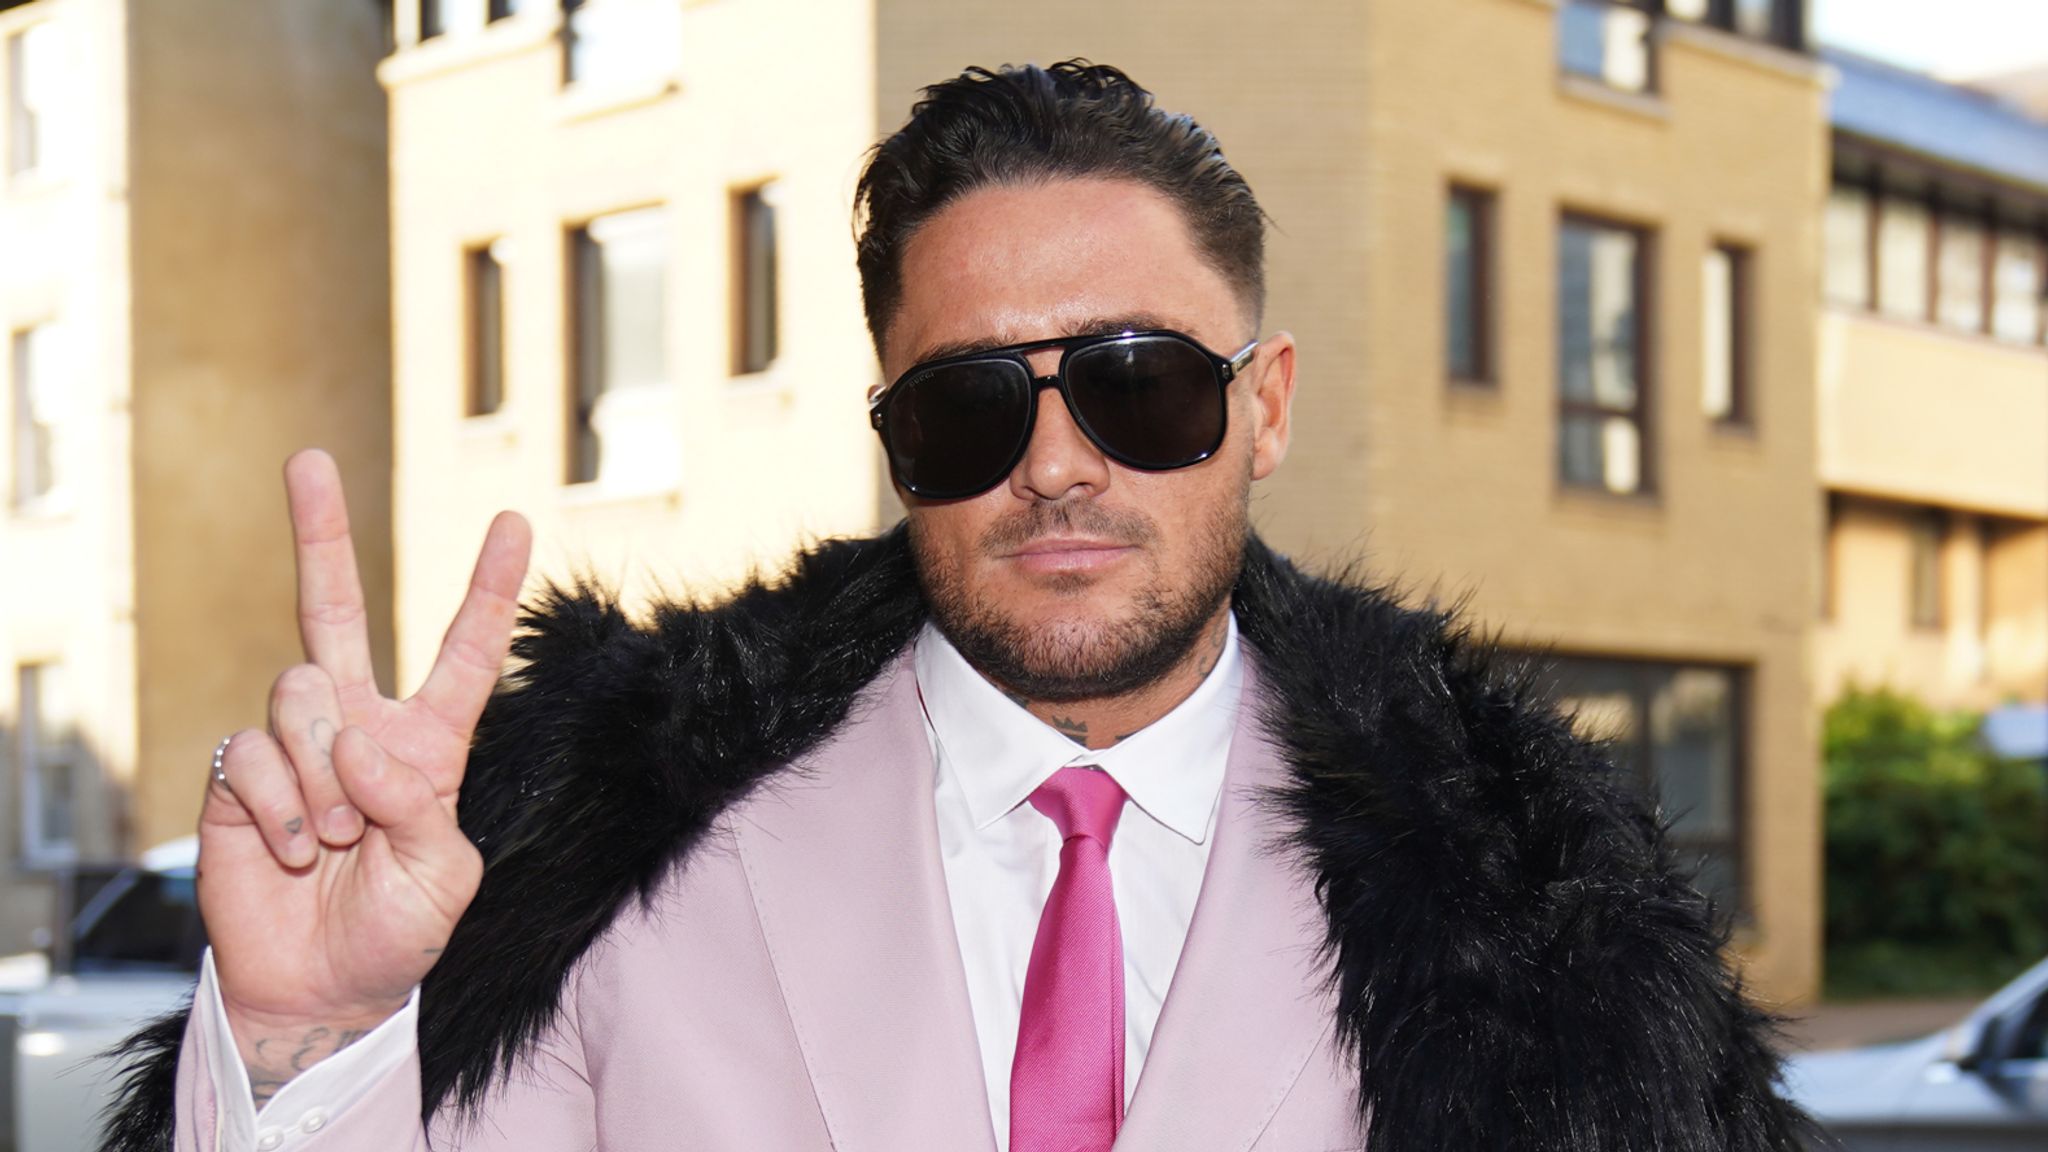 Stephen Bear Reality TV star on trial accused of sharing garden sex tape on OnlyFans Ents and Arts News Sky News image pic